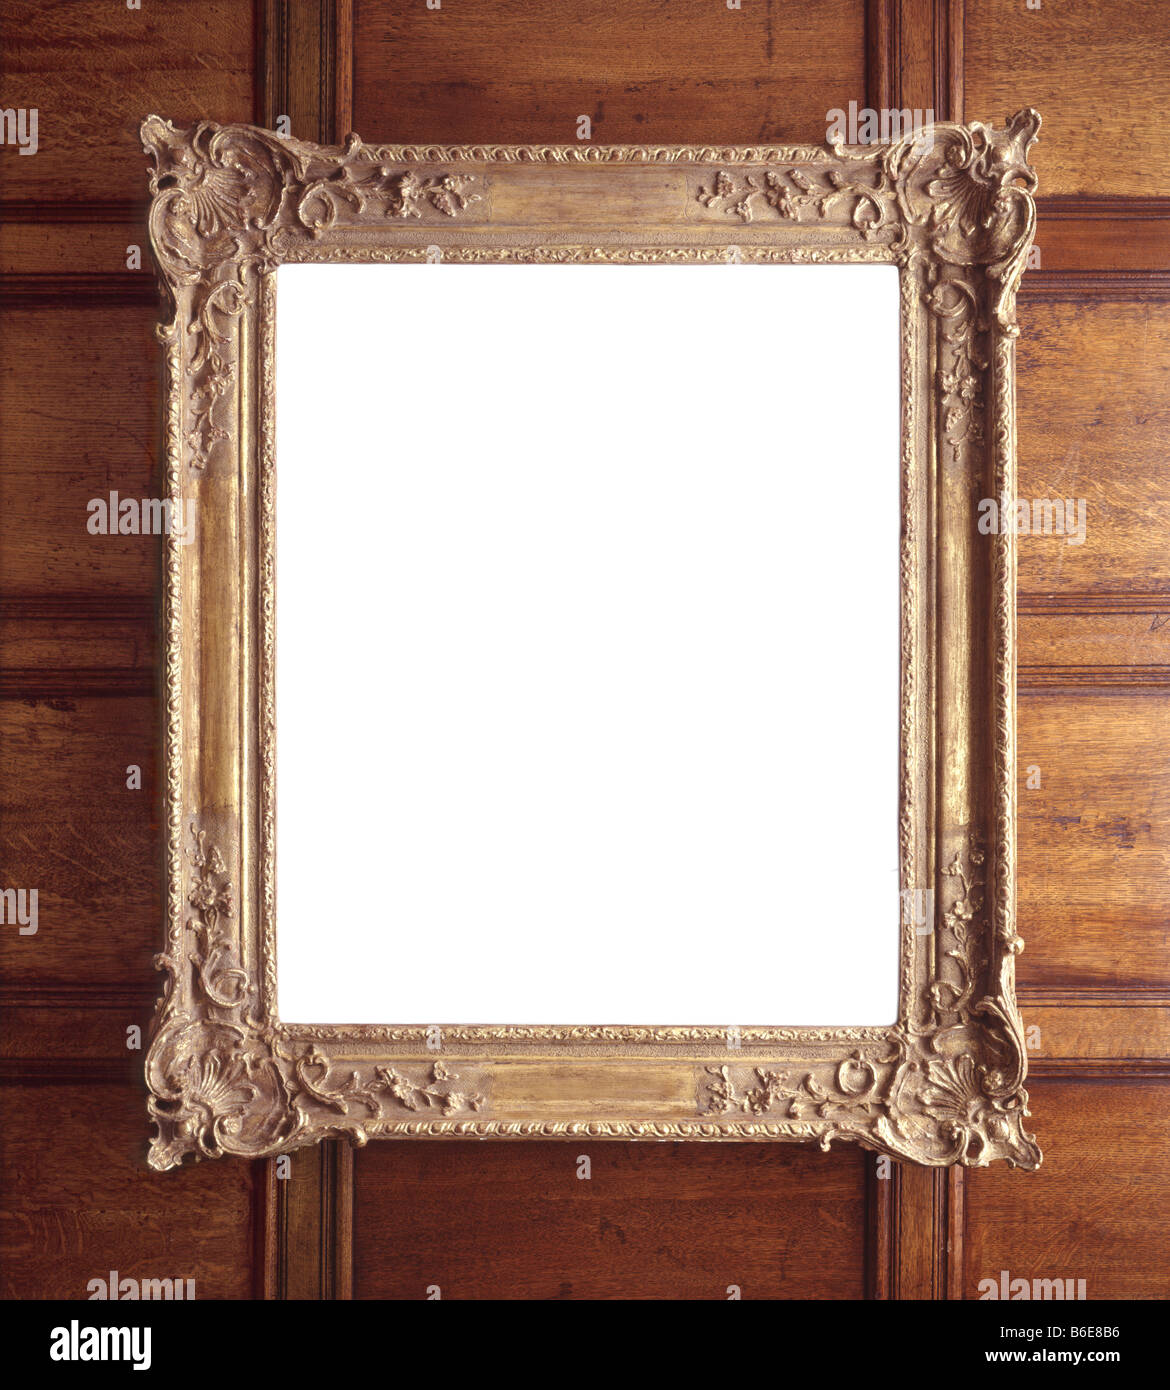 Ornate Gilt Picture frame on wooden paneling. Blank to add your own Picture! Stock Photo